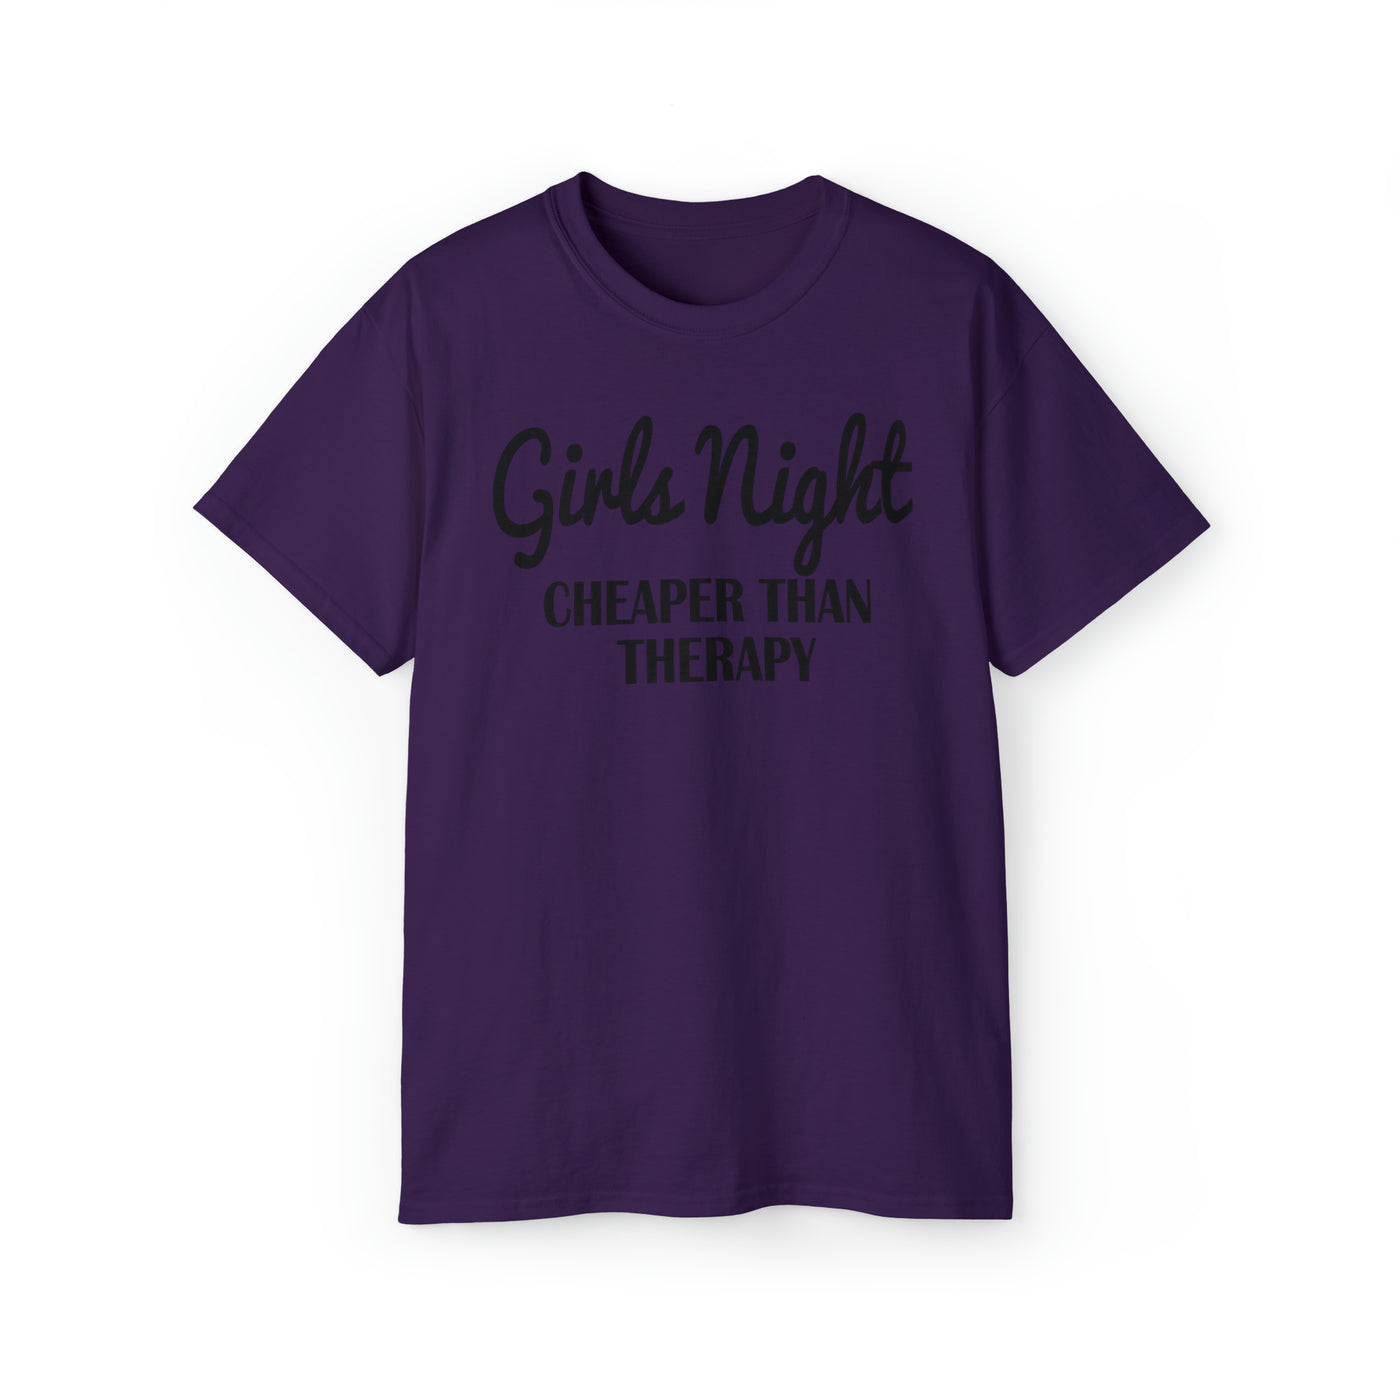 Women's Front Graphic Tees | Women's Ultra Cotton Tee | Let's Travel